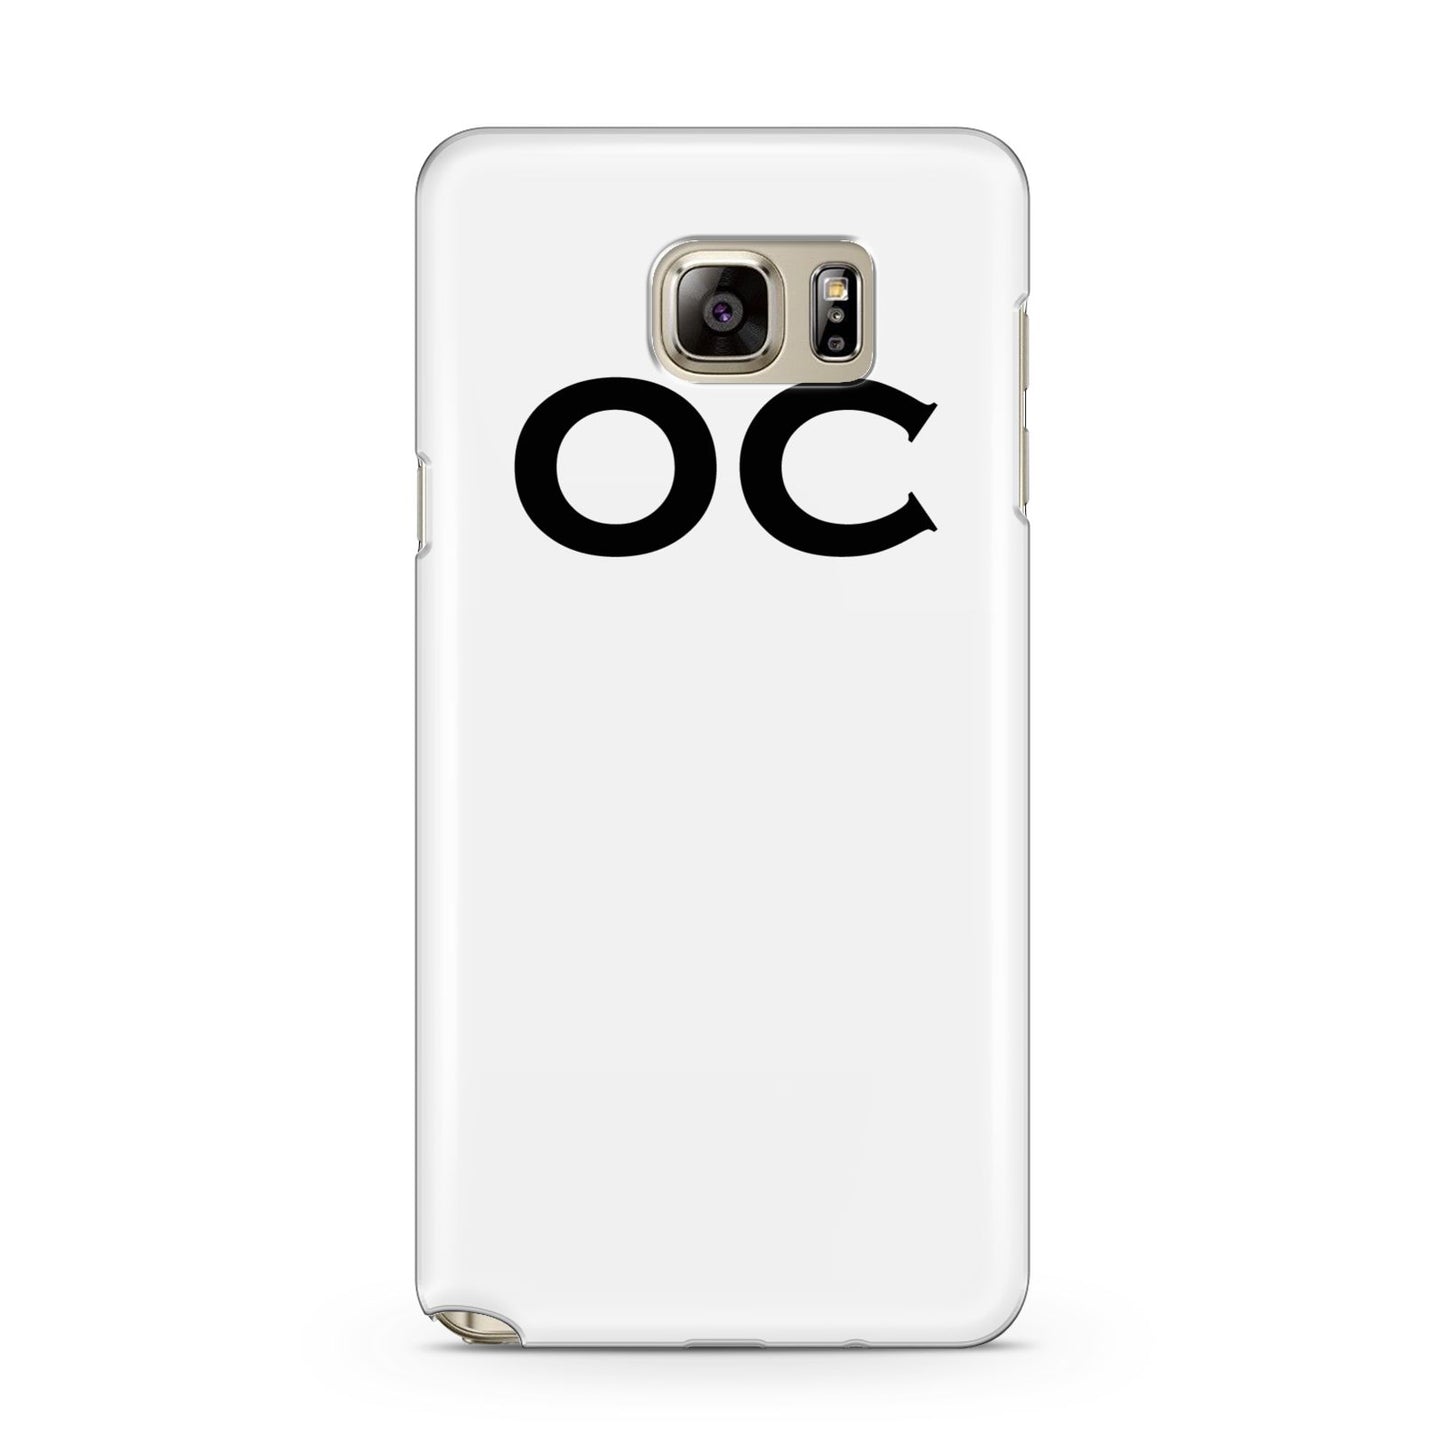 Personalised Initials 3 Samsung Galaxy Note 5 Case